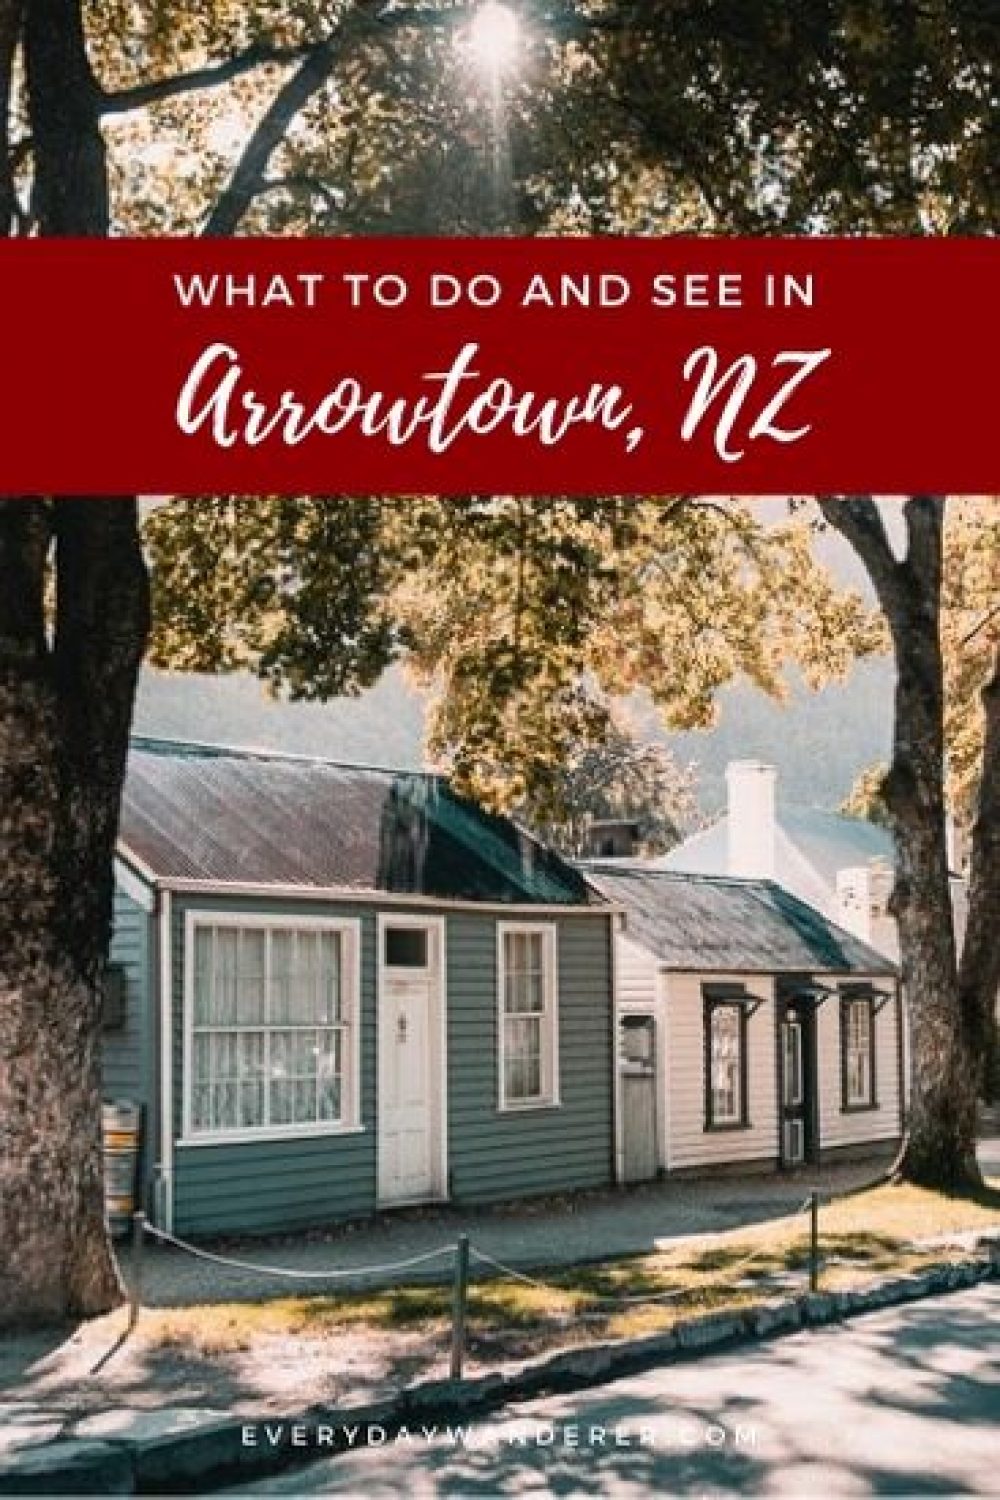 Visit the quaint town of Arrowtown New Zealand through this Everyday Postcard. See the leaves change colors when you experience a Arrowtown New Zealand autumn. Walk down Main Street in Arrowtown NZ #arrowtown #newzealand #travel